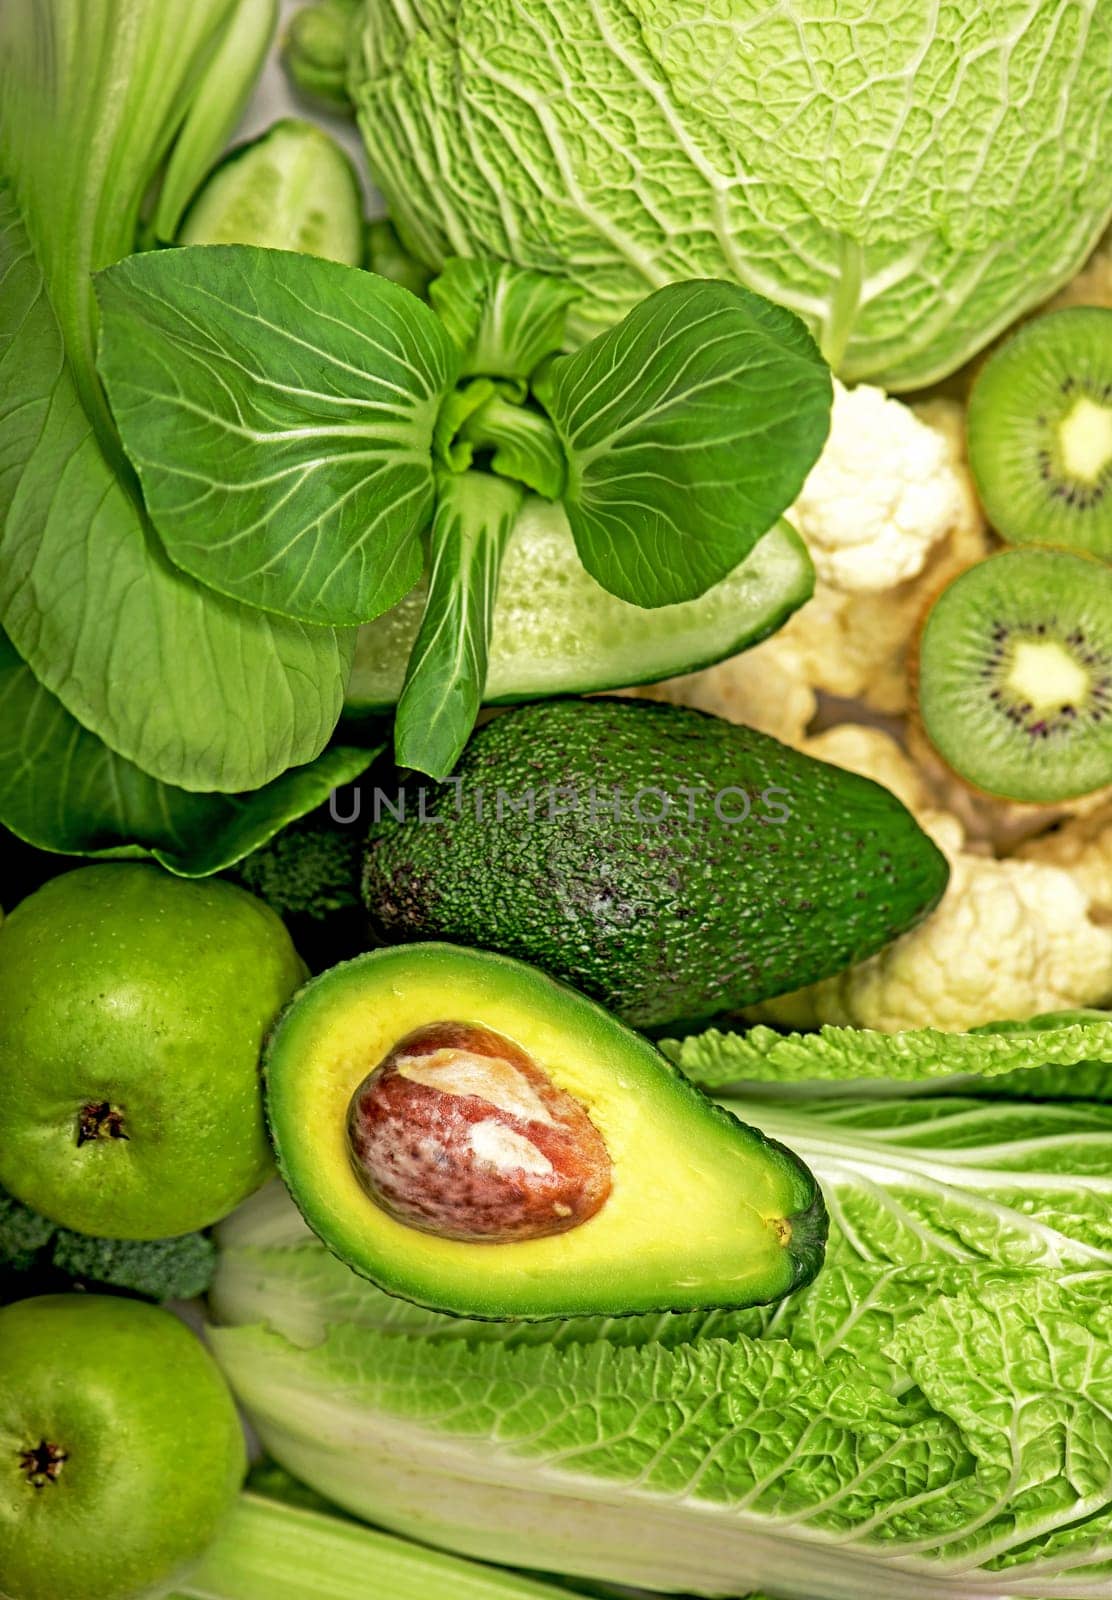 green still life. avocado, cabbage, apples, kiwi and other green vegetables for background by aprilphoto